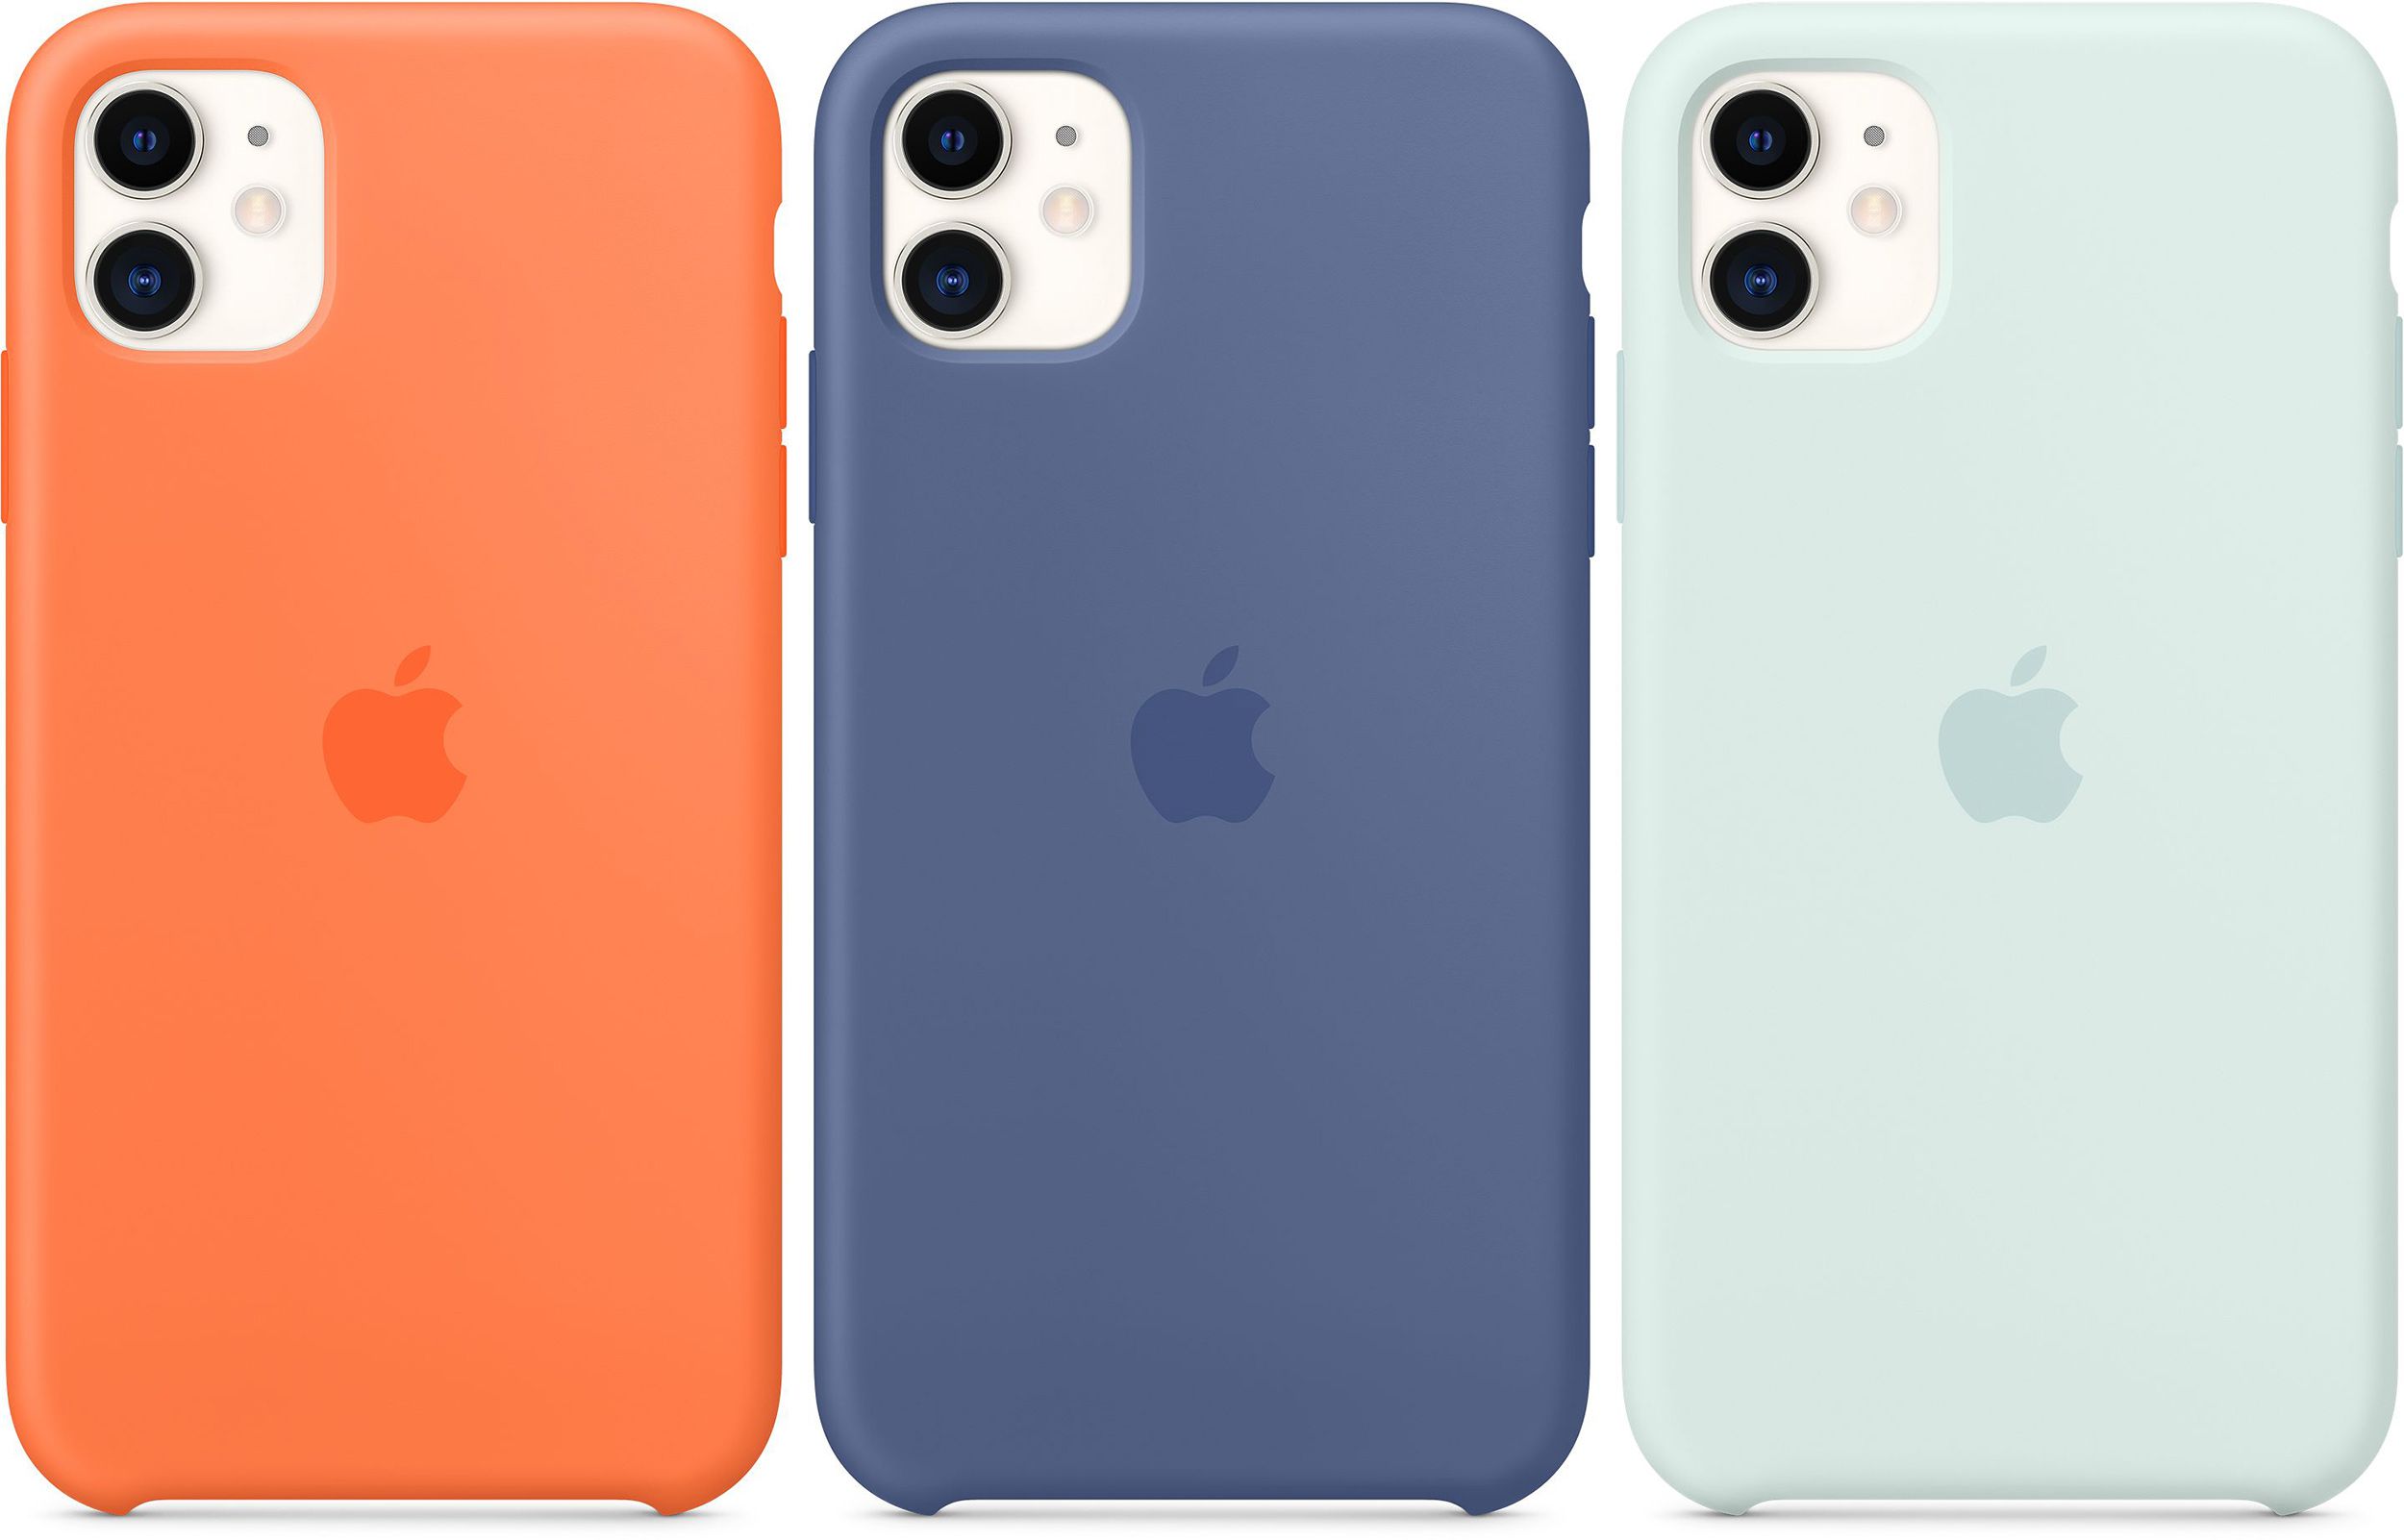 Apple Releases Iphone 11 And 11 Pro Silicone Cases In New Colors Macrumors